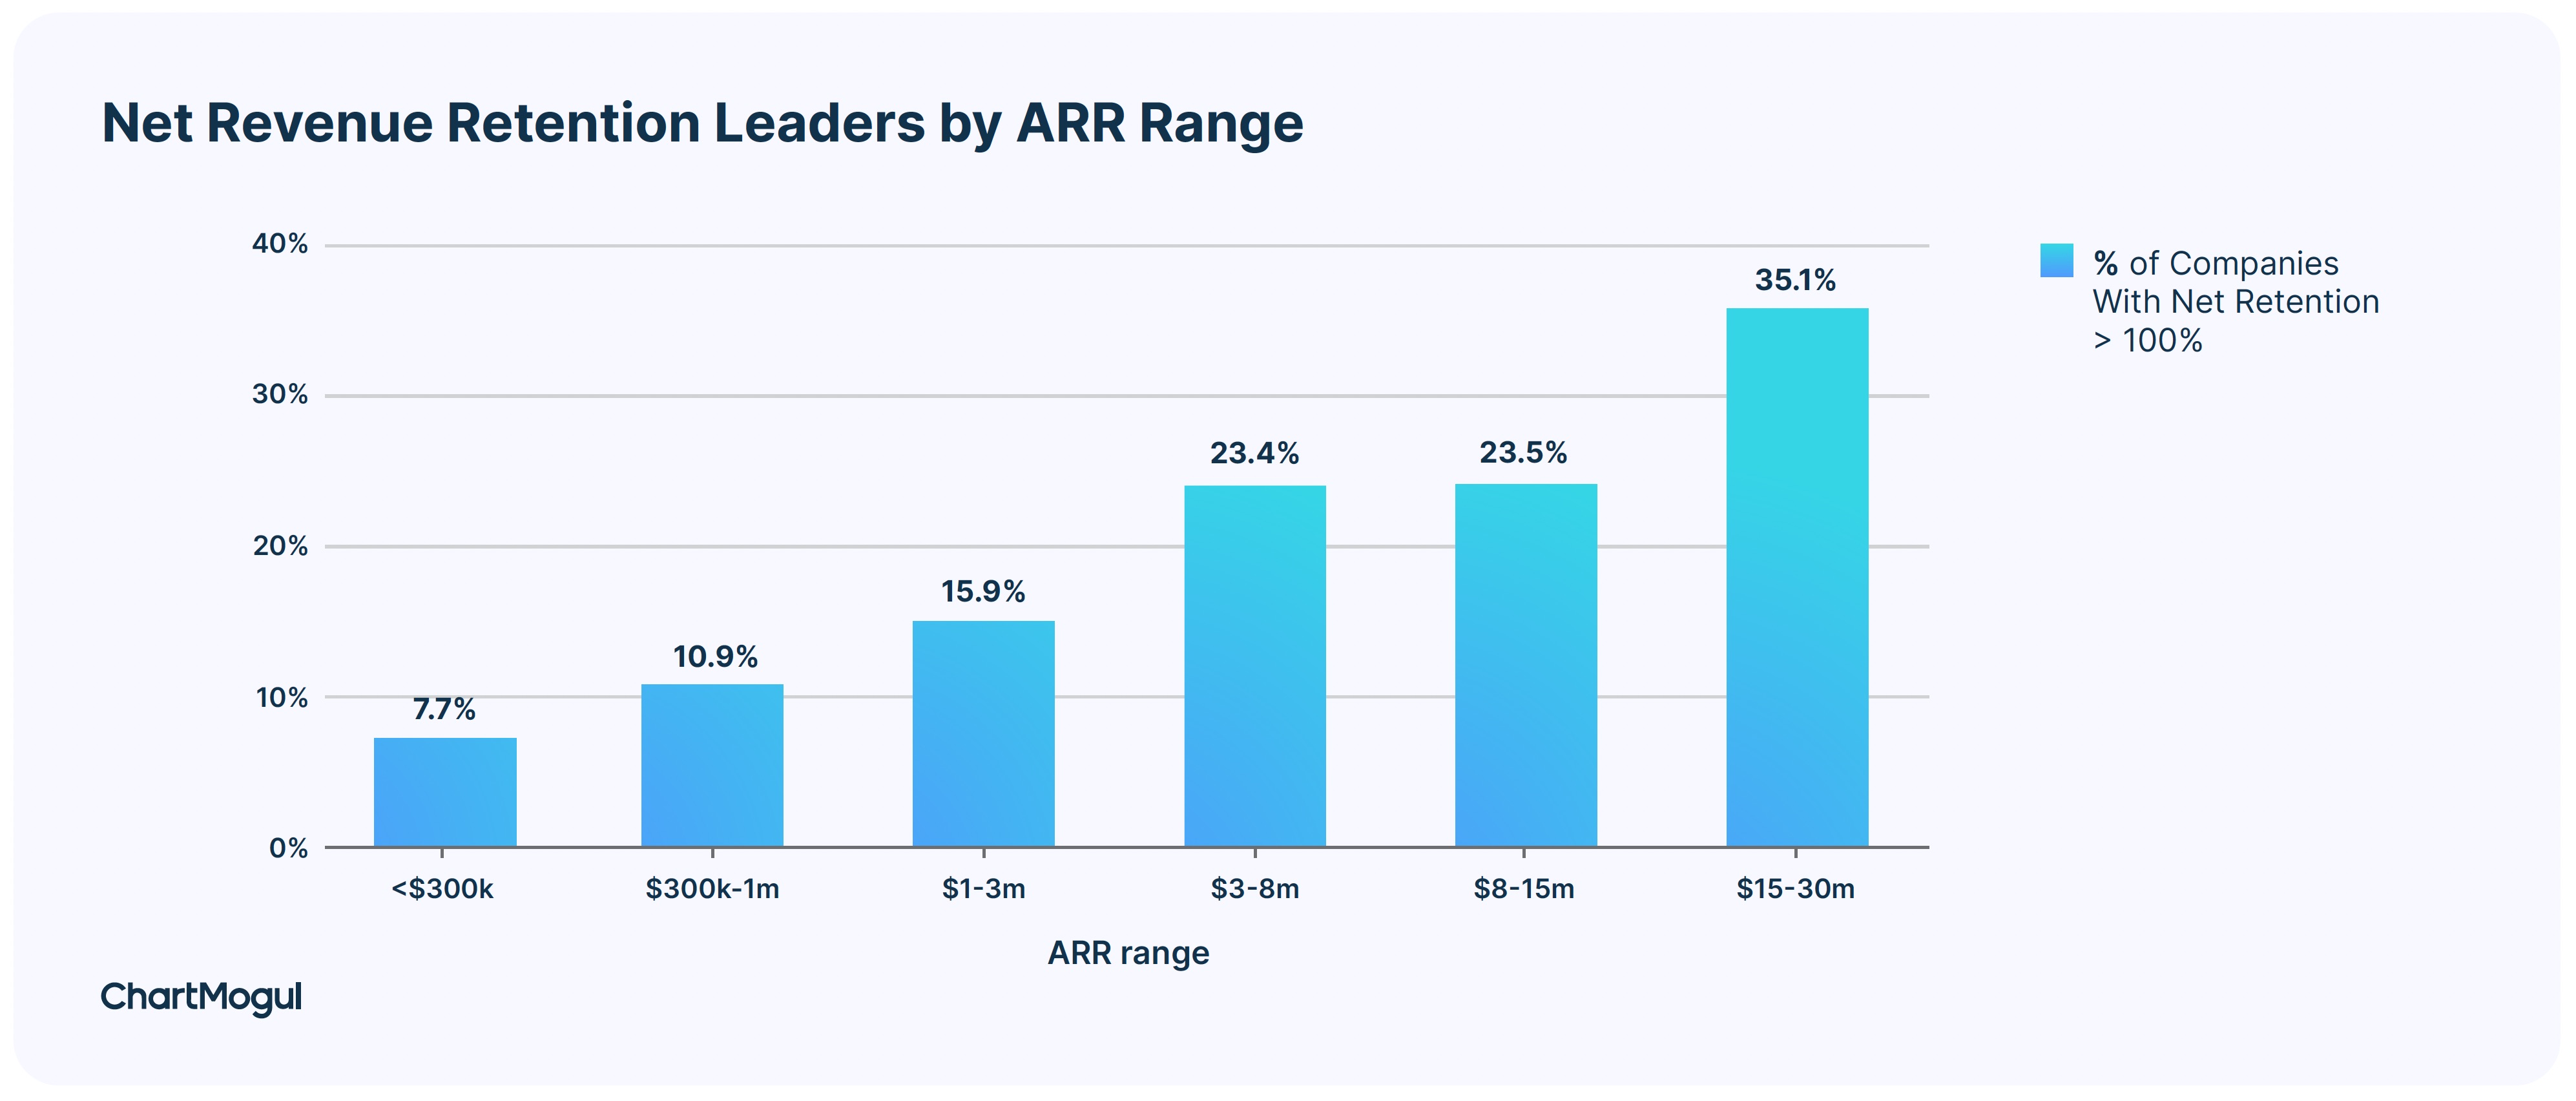 Net income retention leaders by ARR range